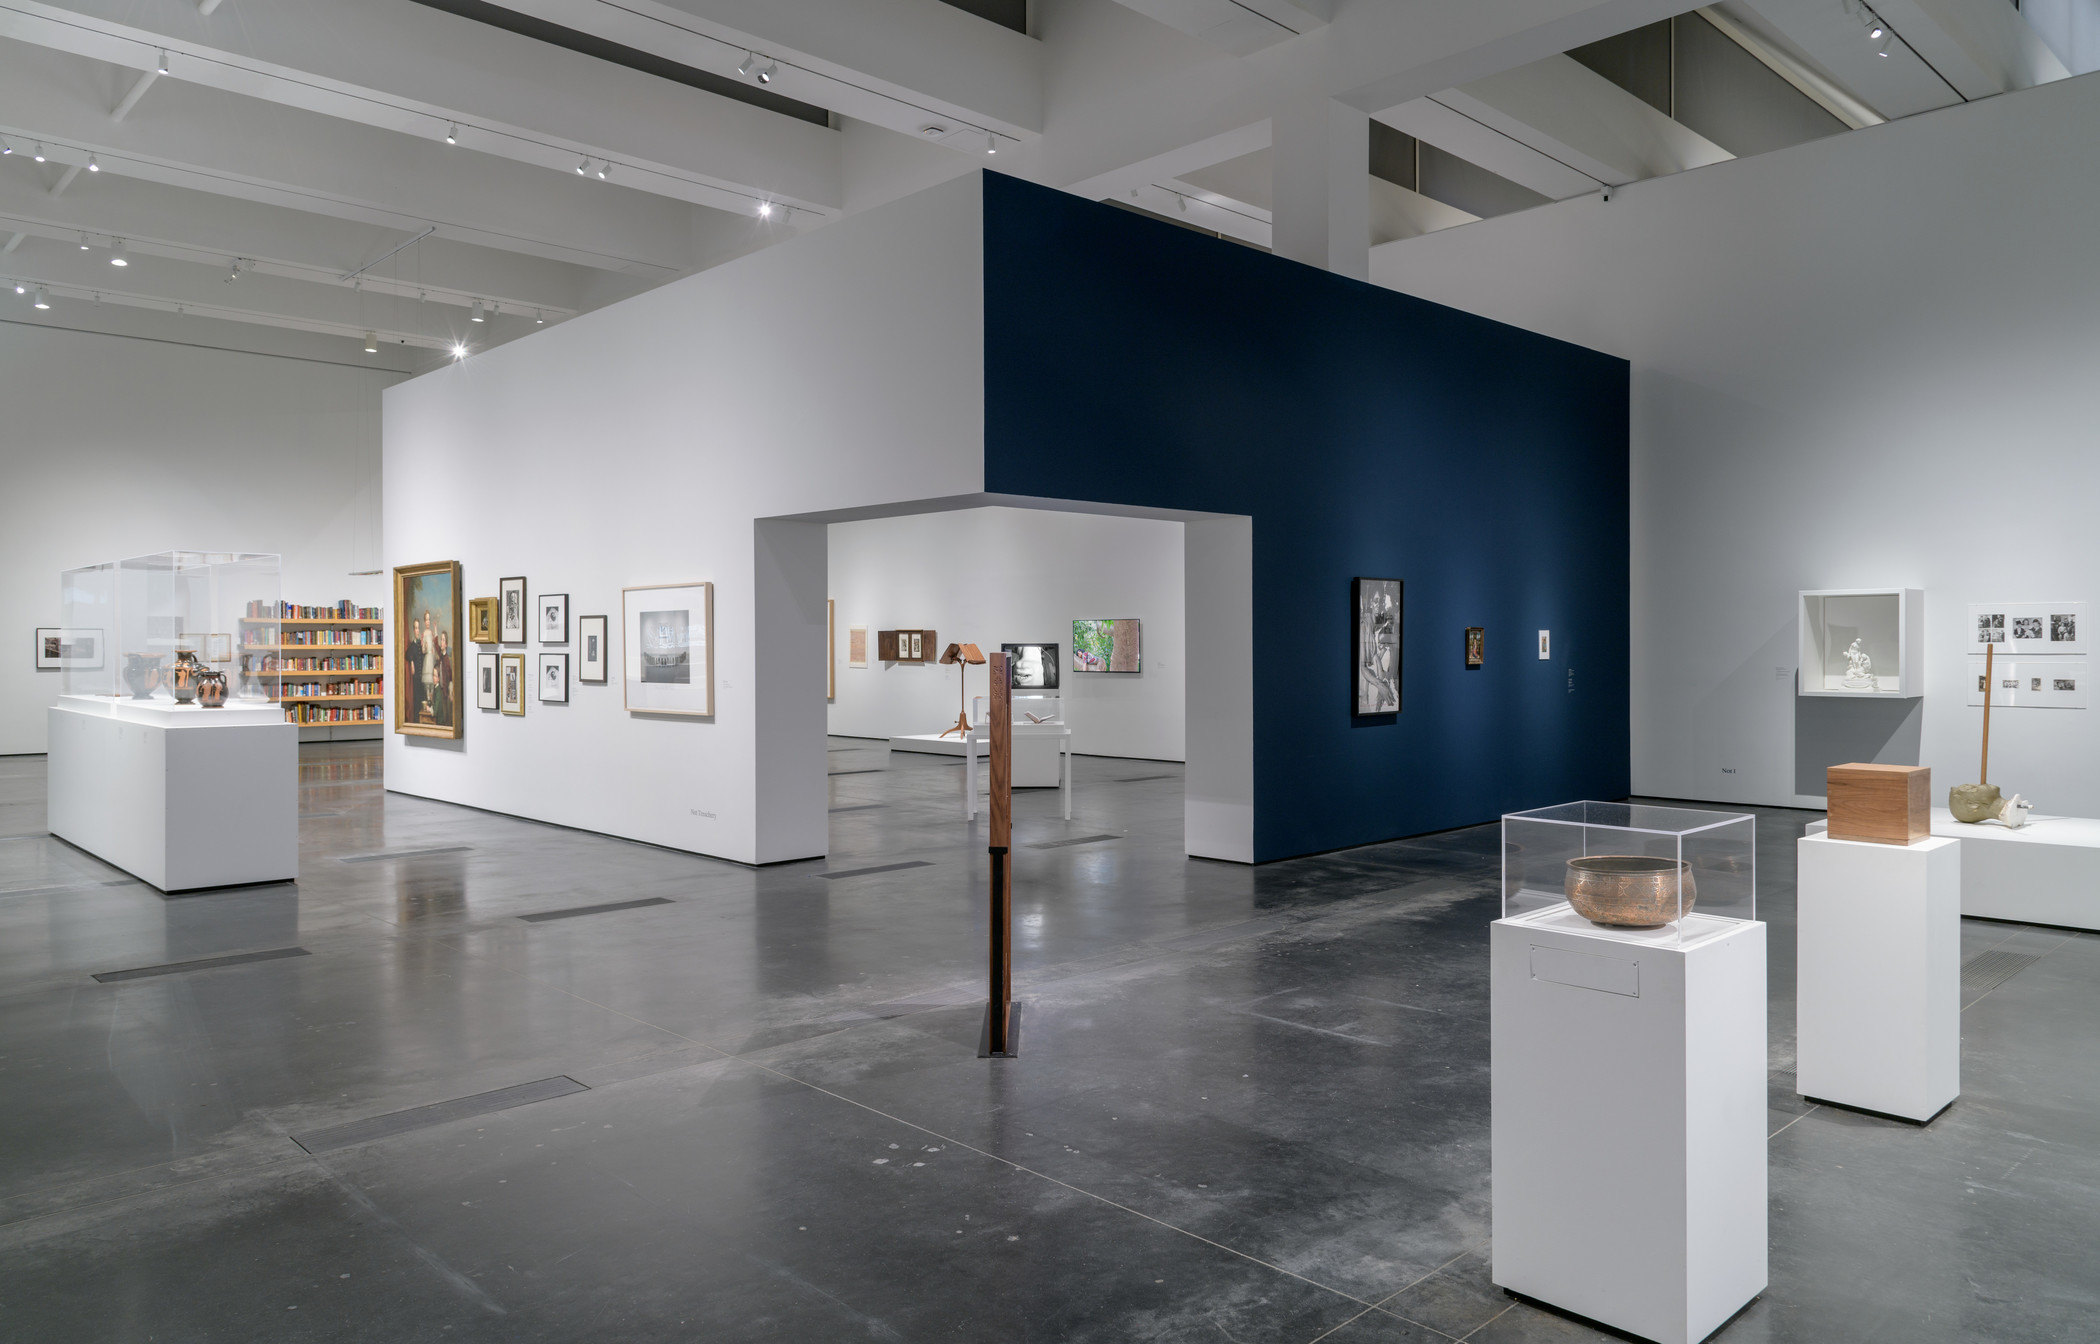 An enclosed gallery is in the center, one wall of which is dark blue, and brown sculpture is in the center of the image, with framed artwork on the walls and objects in vitrines and pedestals